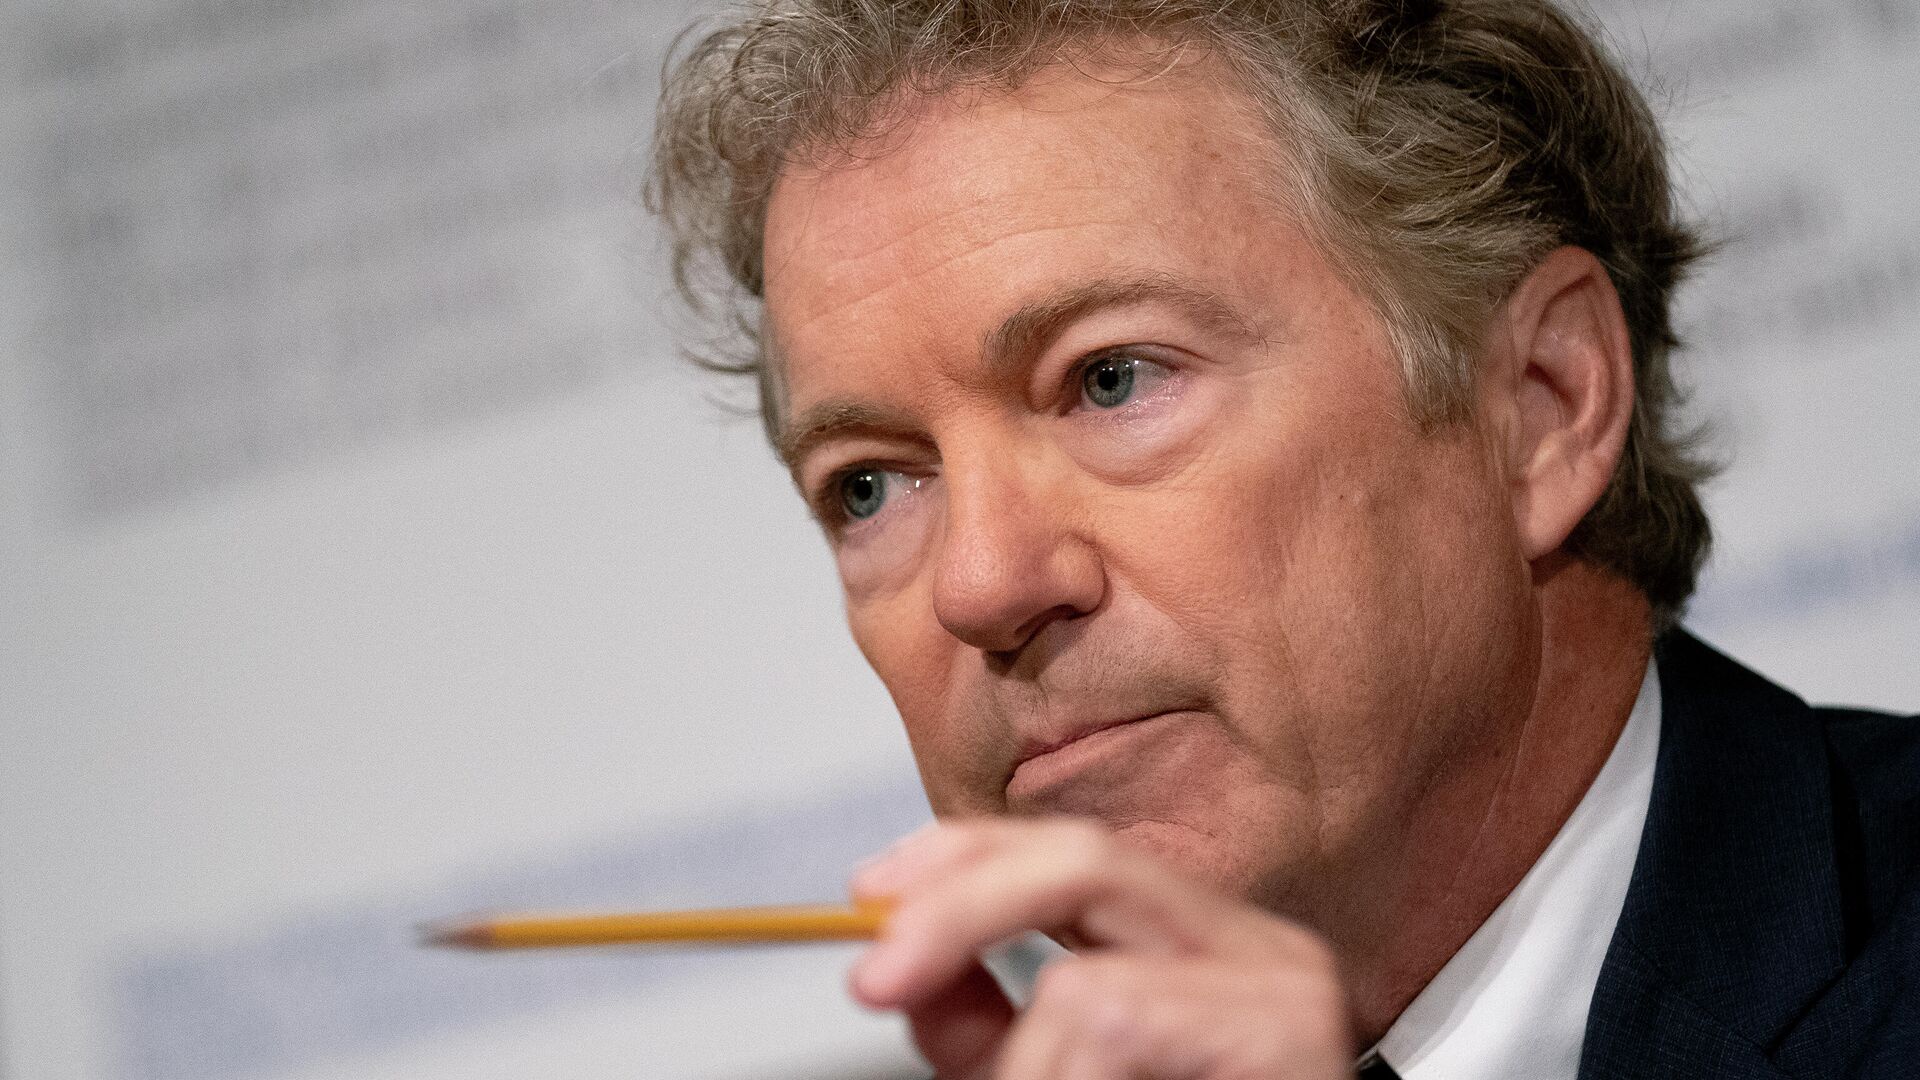 Senator Rand Paul (R-KY) speaks during the Senate Health, Education, Labor, and Pensions Committee hearing on Capitol Hill in Washington, DC, on July 20, 2021 - Sputnik International, 1920, 11.09.2021